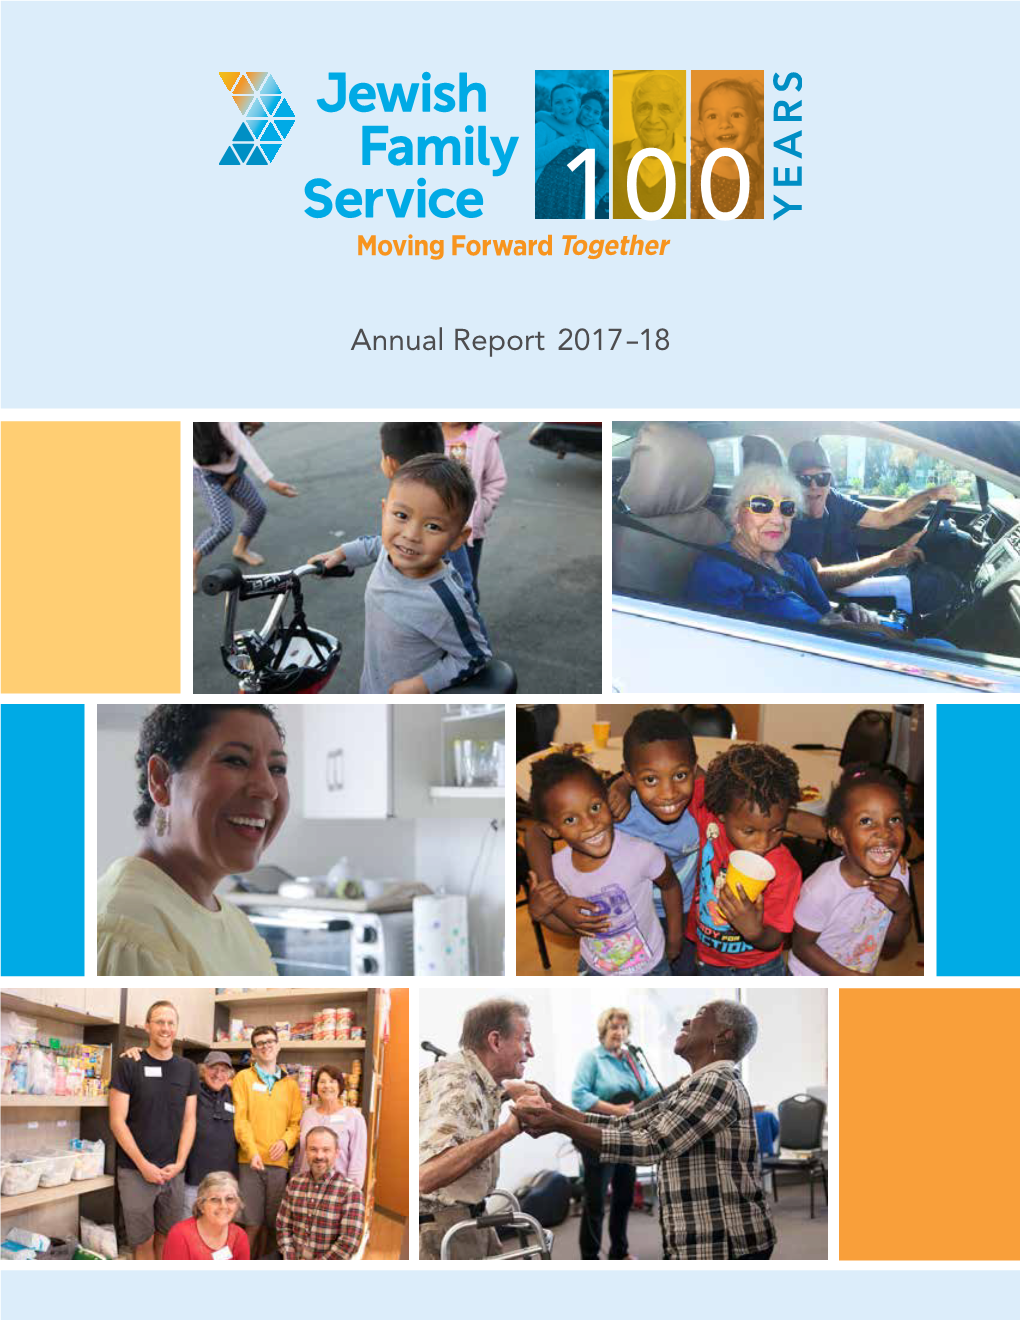 Annual Report 2017 –18 Celebrating 100 Years of Life-Changing Service in San Diego